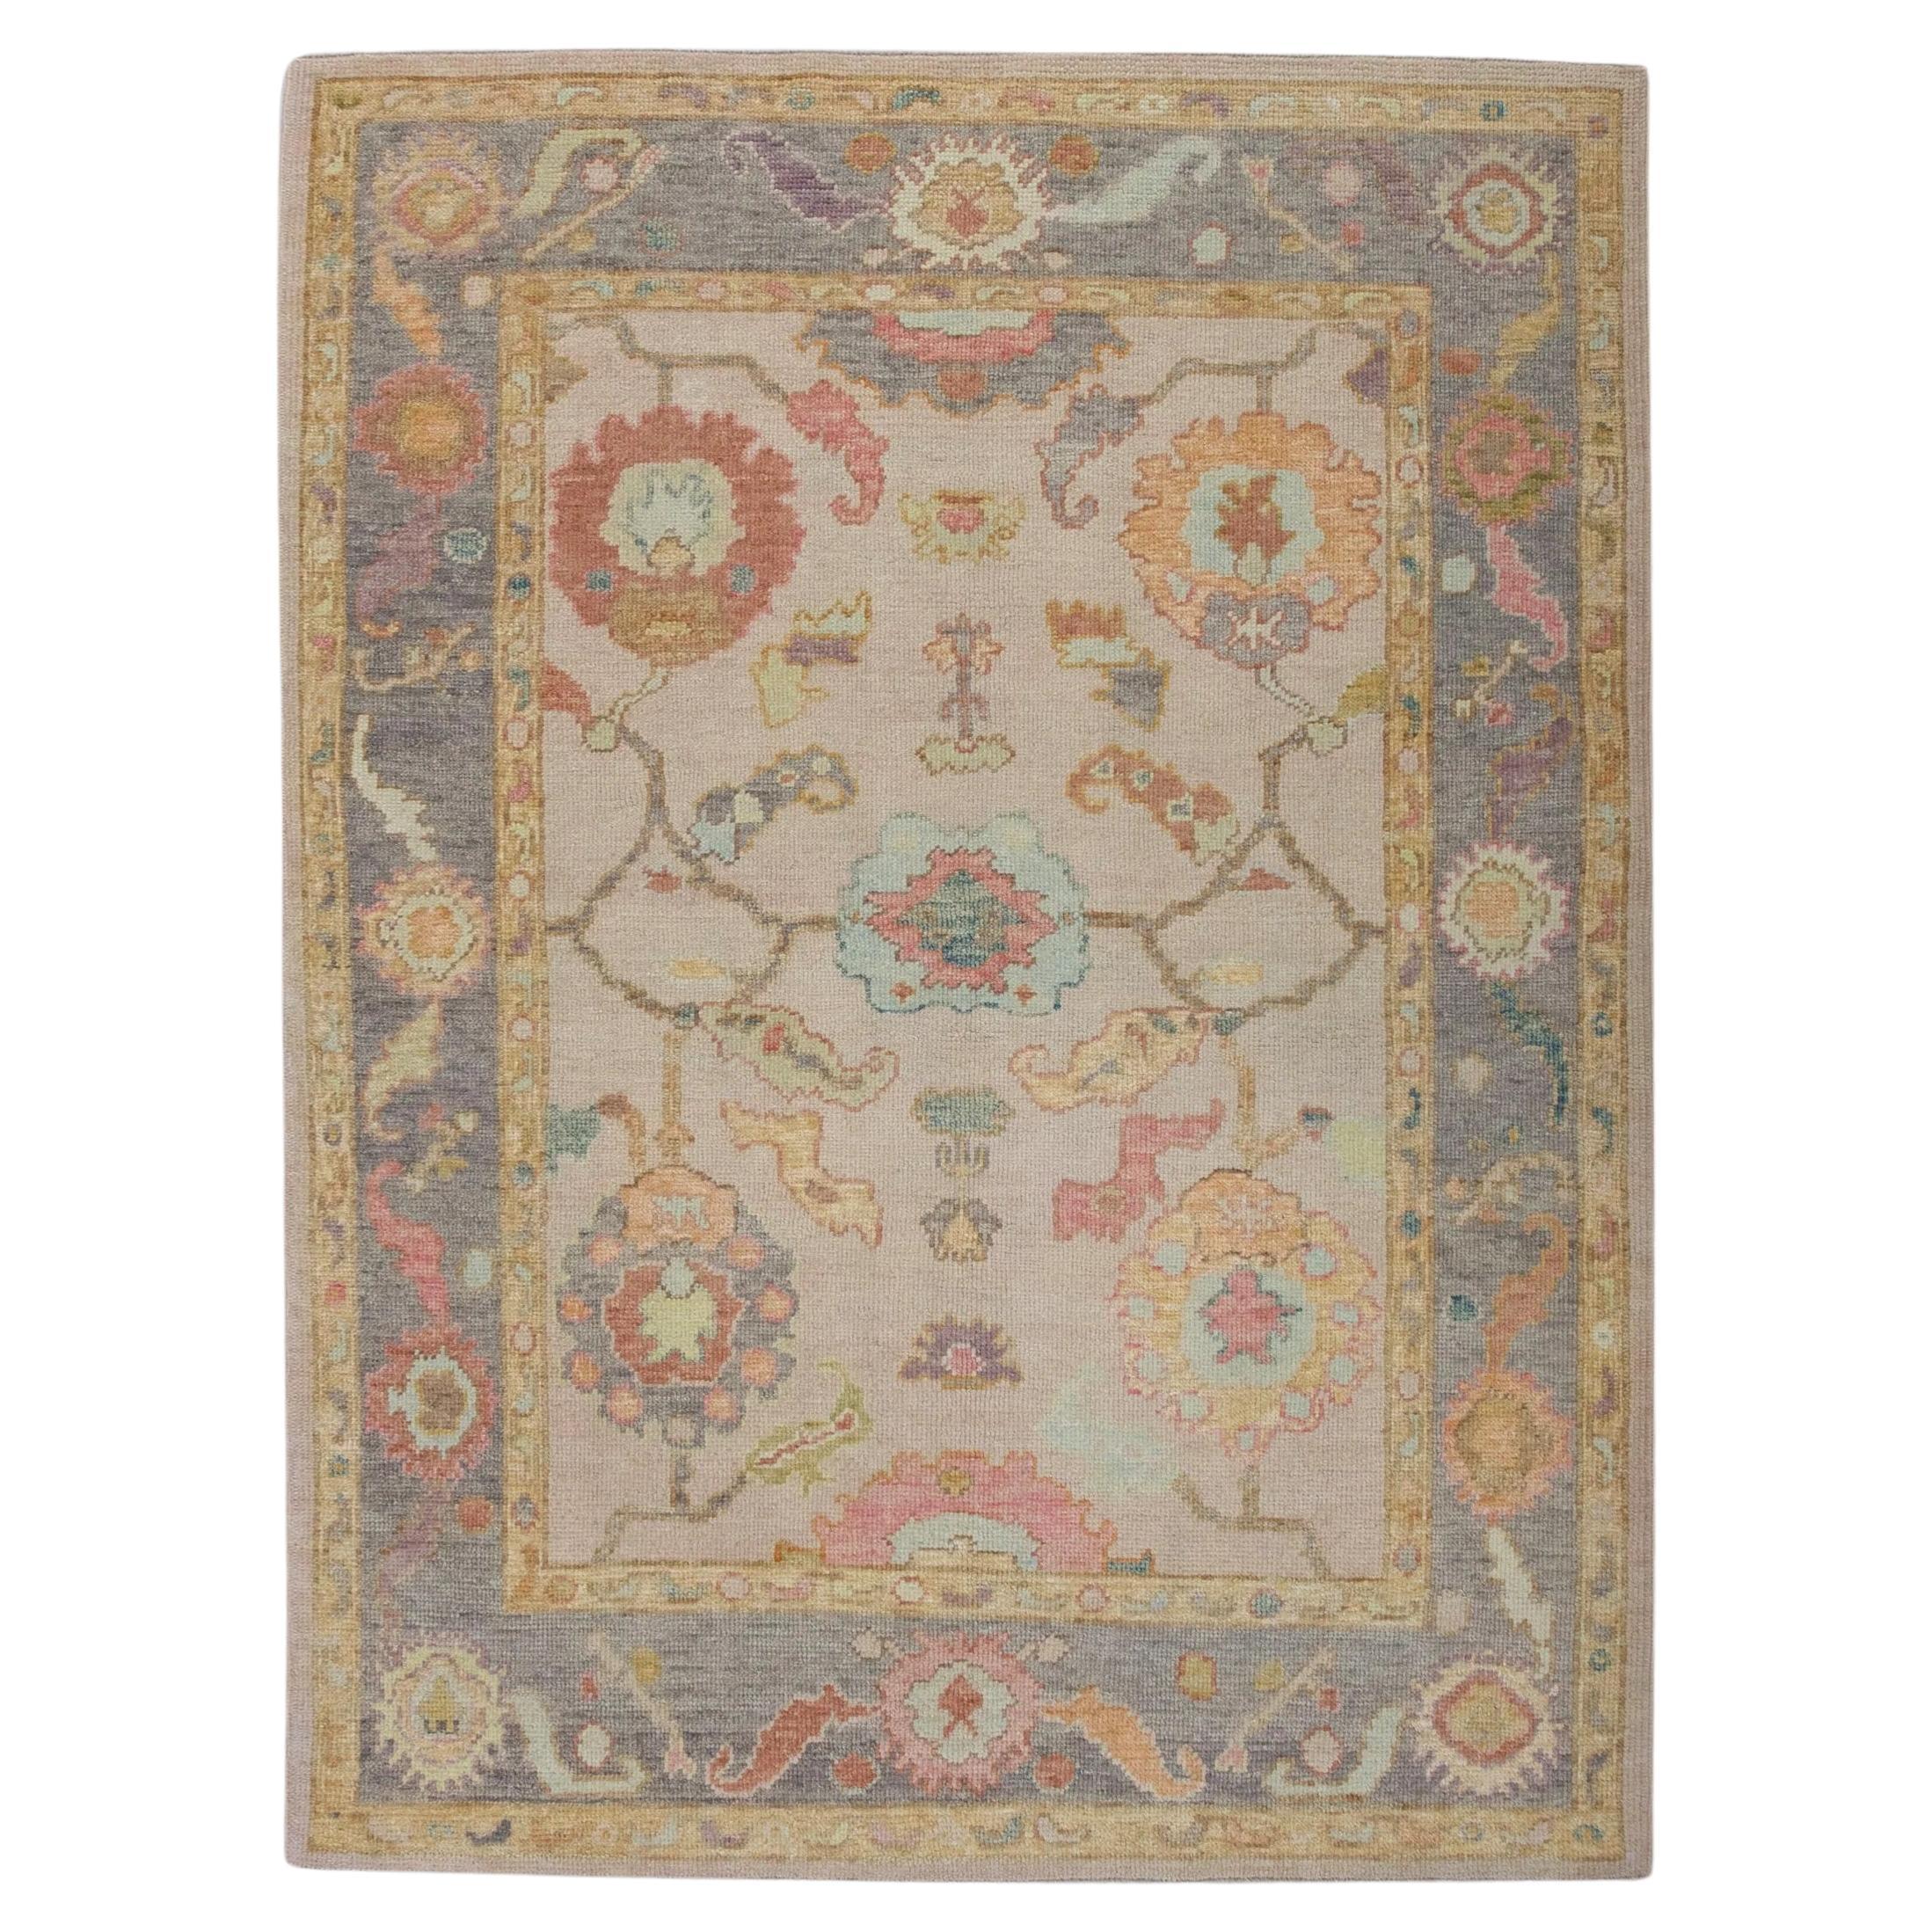 Floral Handwoven Wool Turkish Oushak Rug in Soft Pink and Purple 5' x 6'9" For Sale